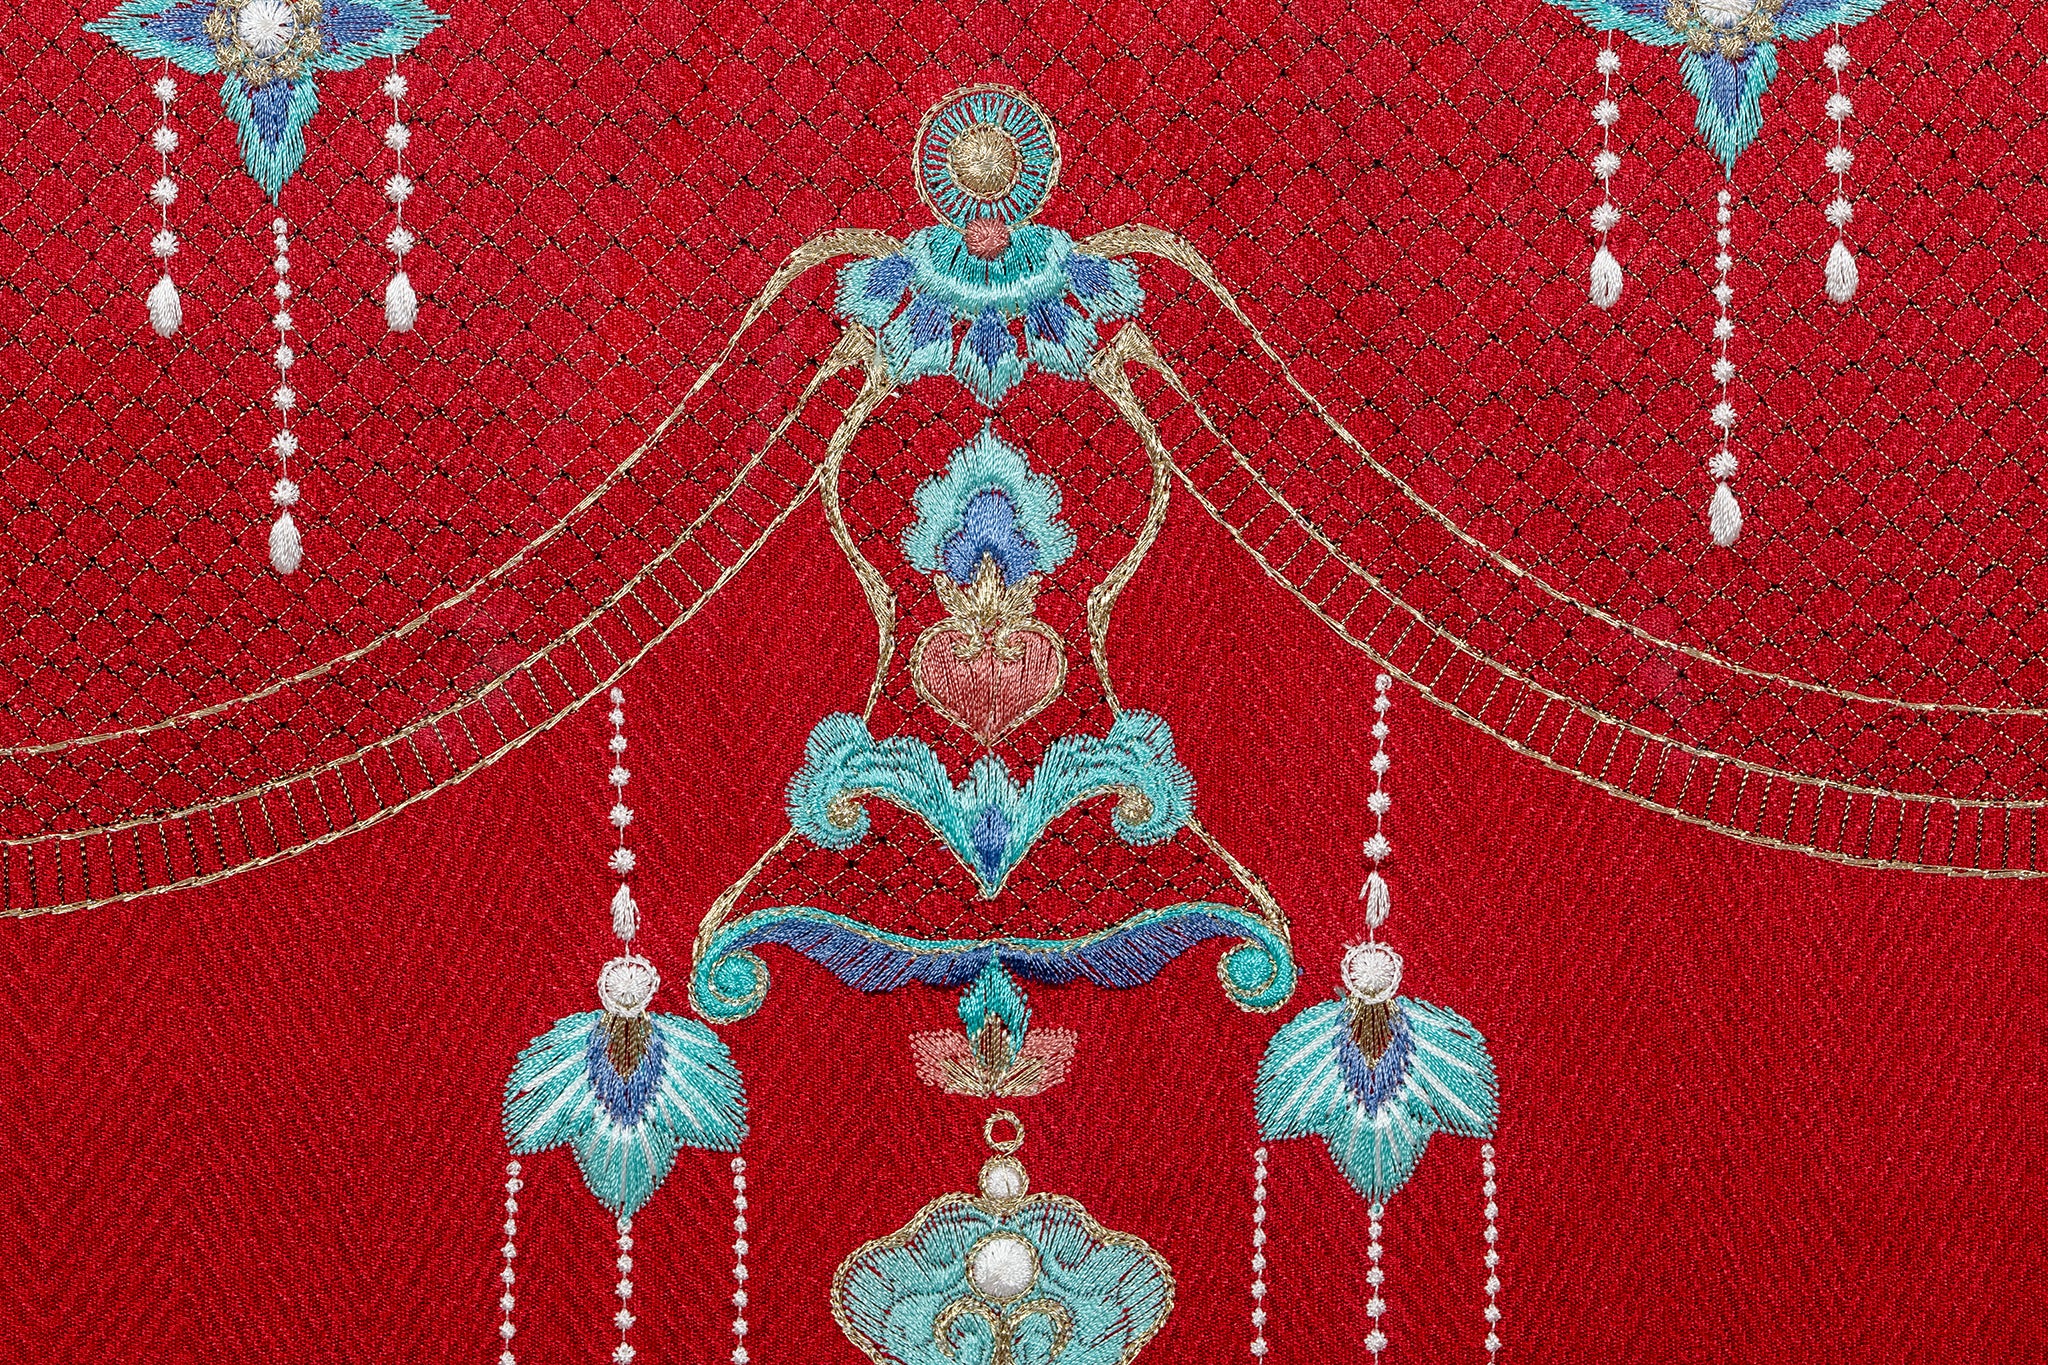 Embroidery artwork's bottom detail of an Oriental phoenix coronet with night-shining jewel and gourd .